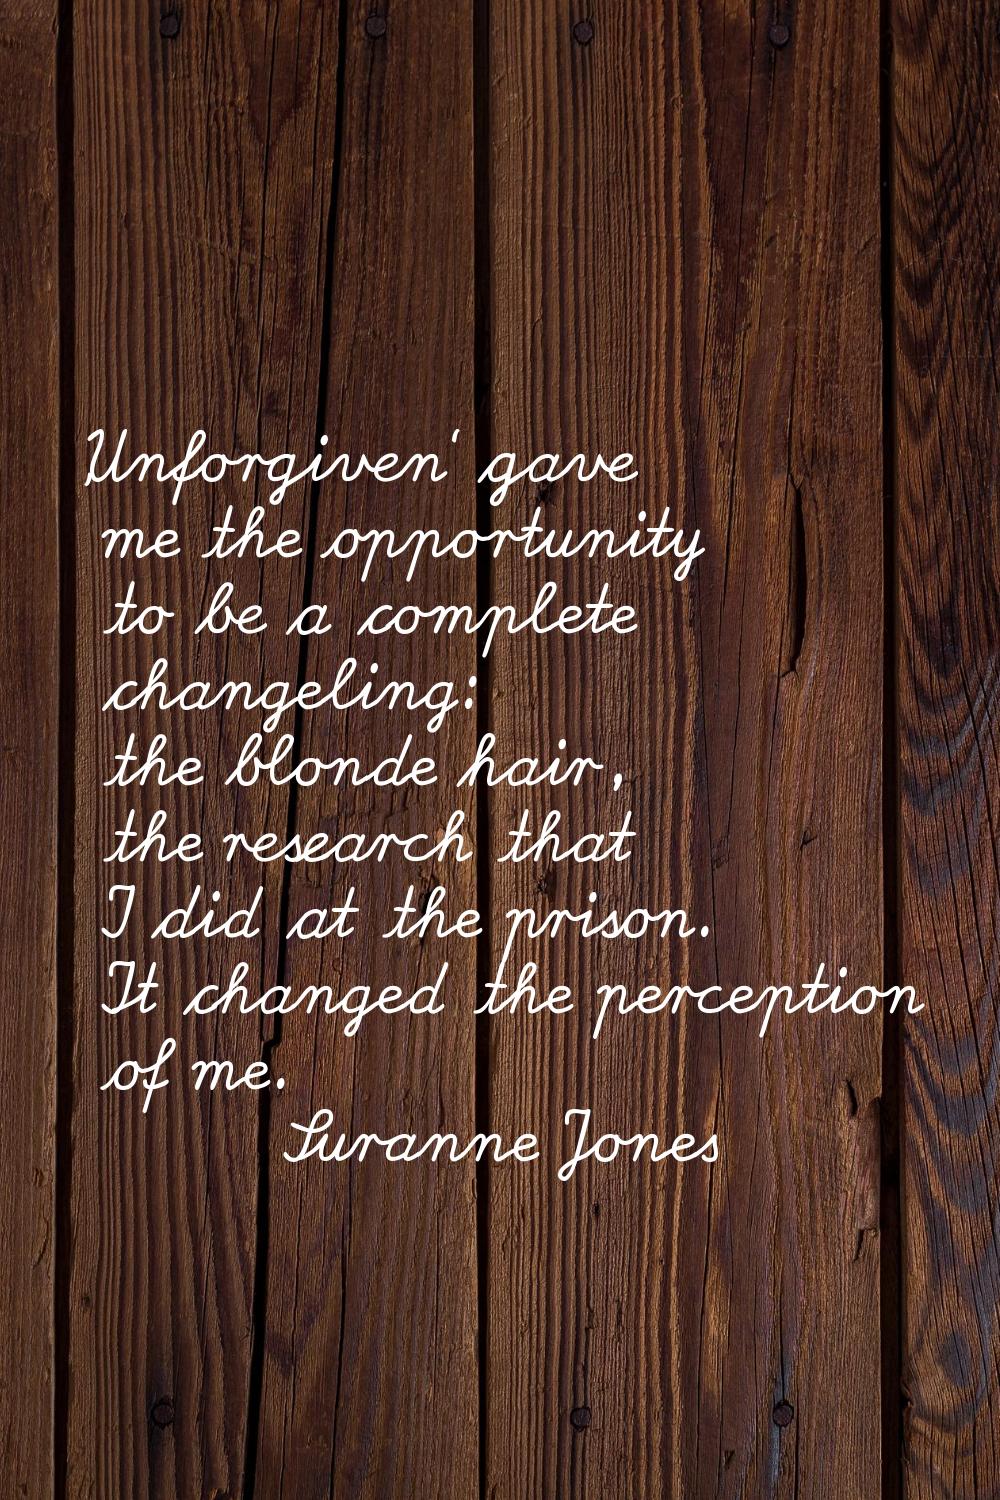 'Unforgiven' gave me the opportunity to be a complete changeling: the blonde hair, the research tha